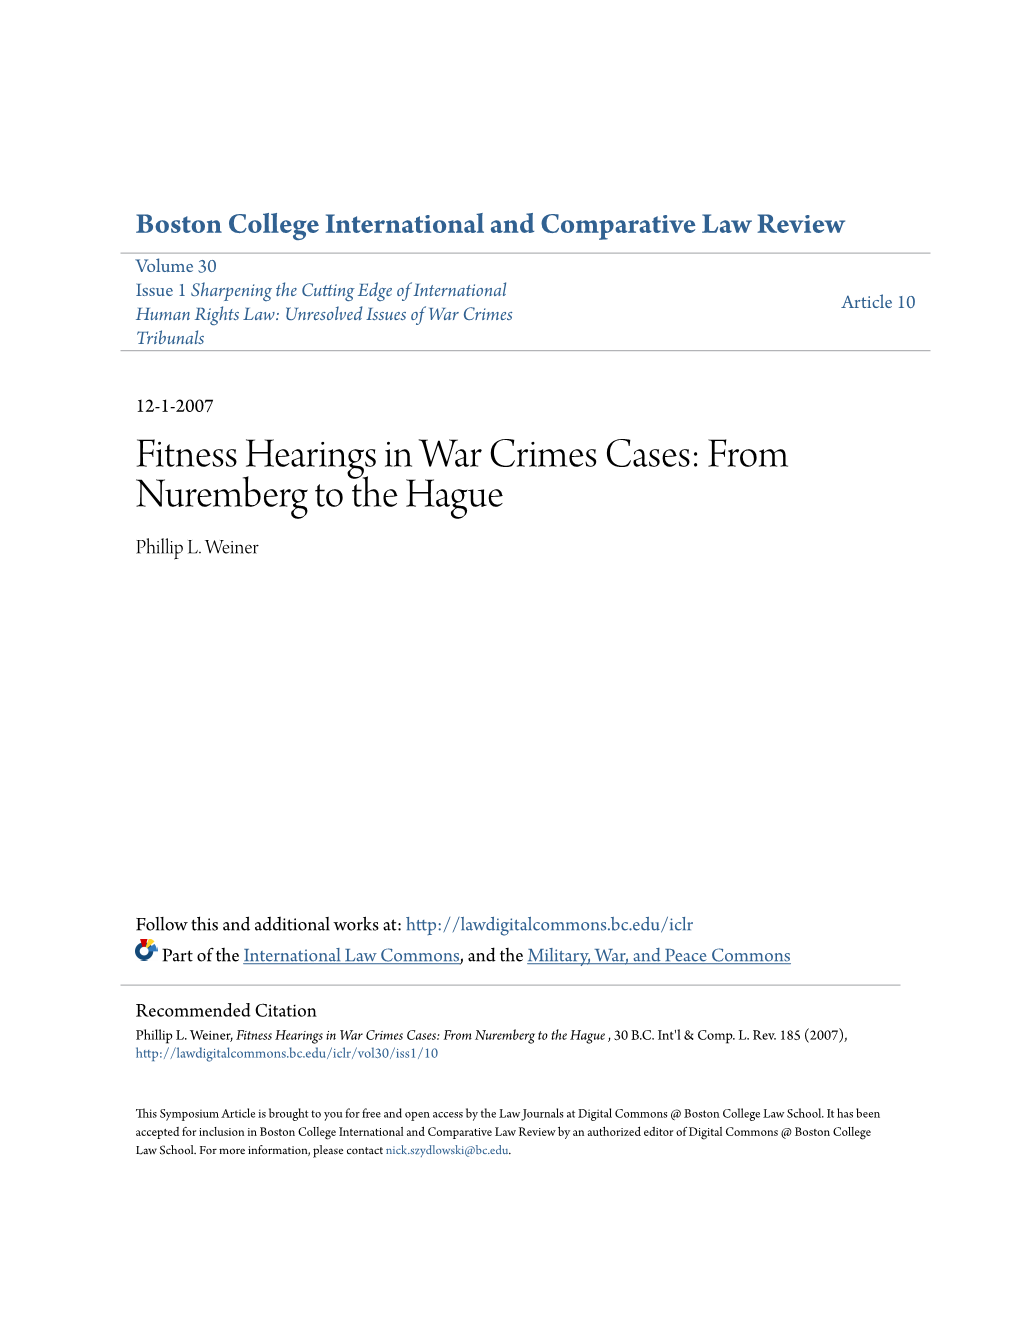 Fitness Hearings in War Crimes Cases: from Nuremberg to the Hague Phillip L